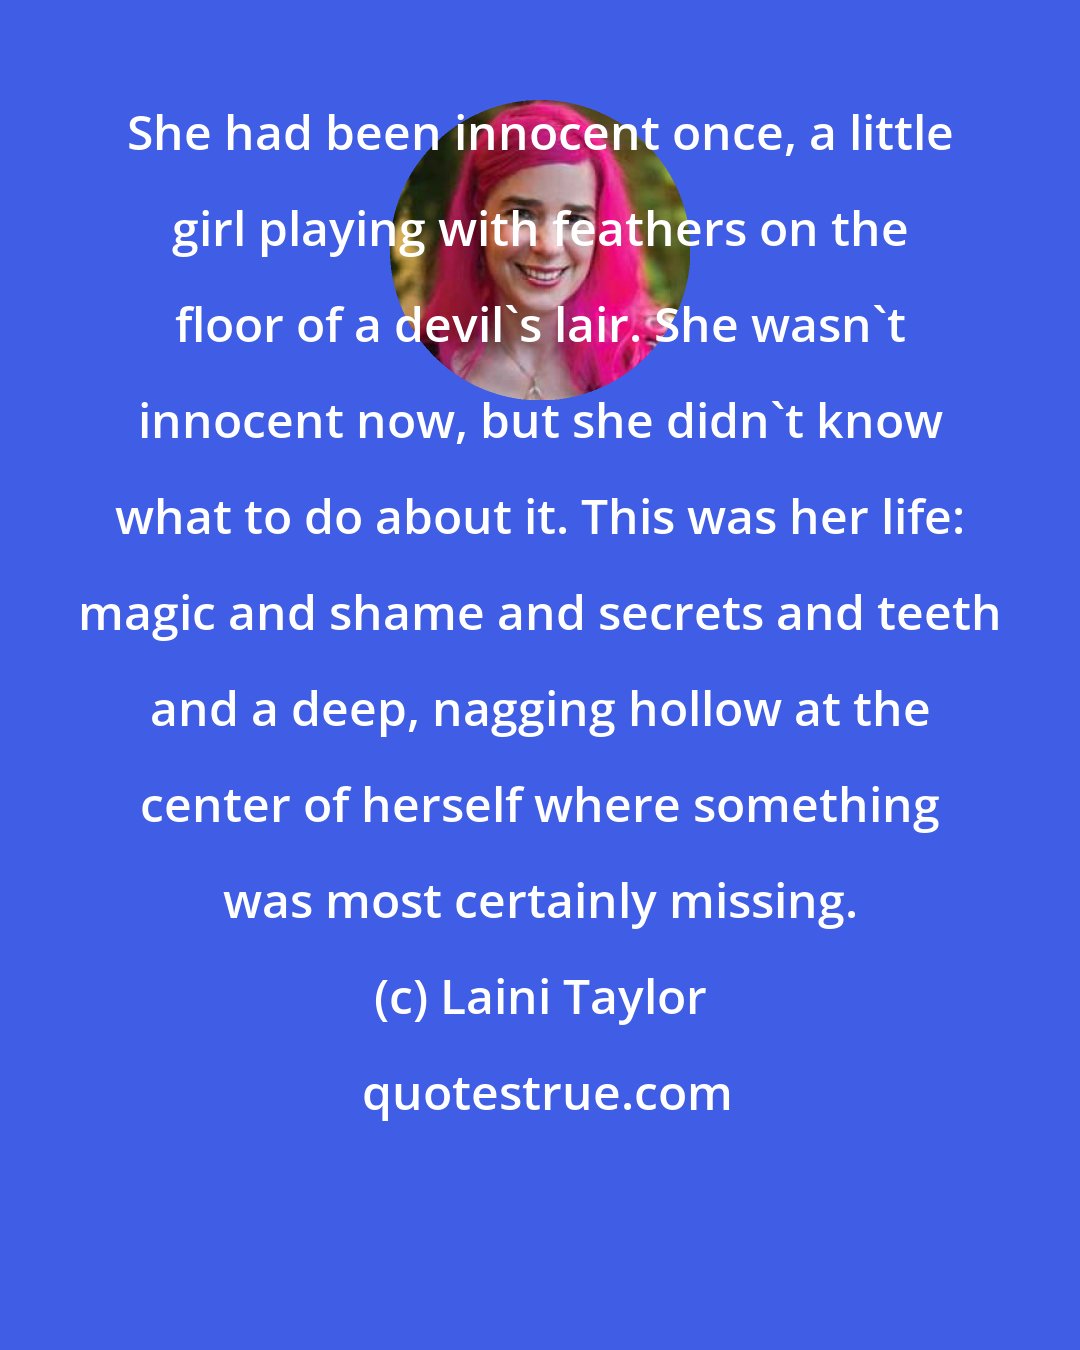 Laini Taylor: She had been innocent once, a little girl playing with feathers on the floor of a devil's lair. She wasn't innocent now, but she didn't know what to do about it. This was her life: magic and shame and secrets and teeth and a deep, nagging hollow at the center of herself where something was most certainly missing.